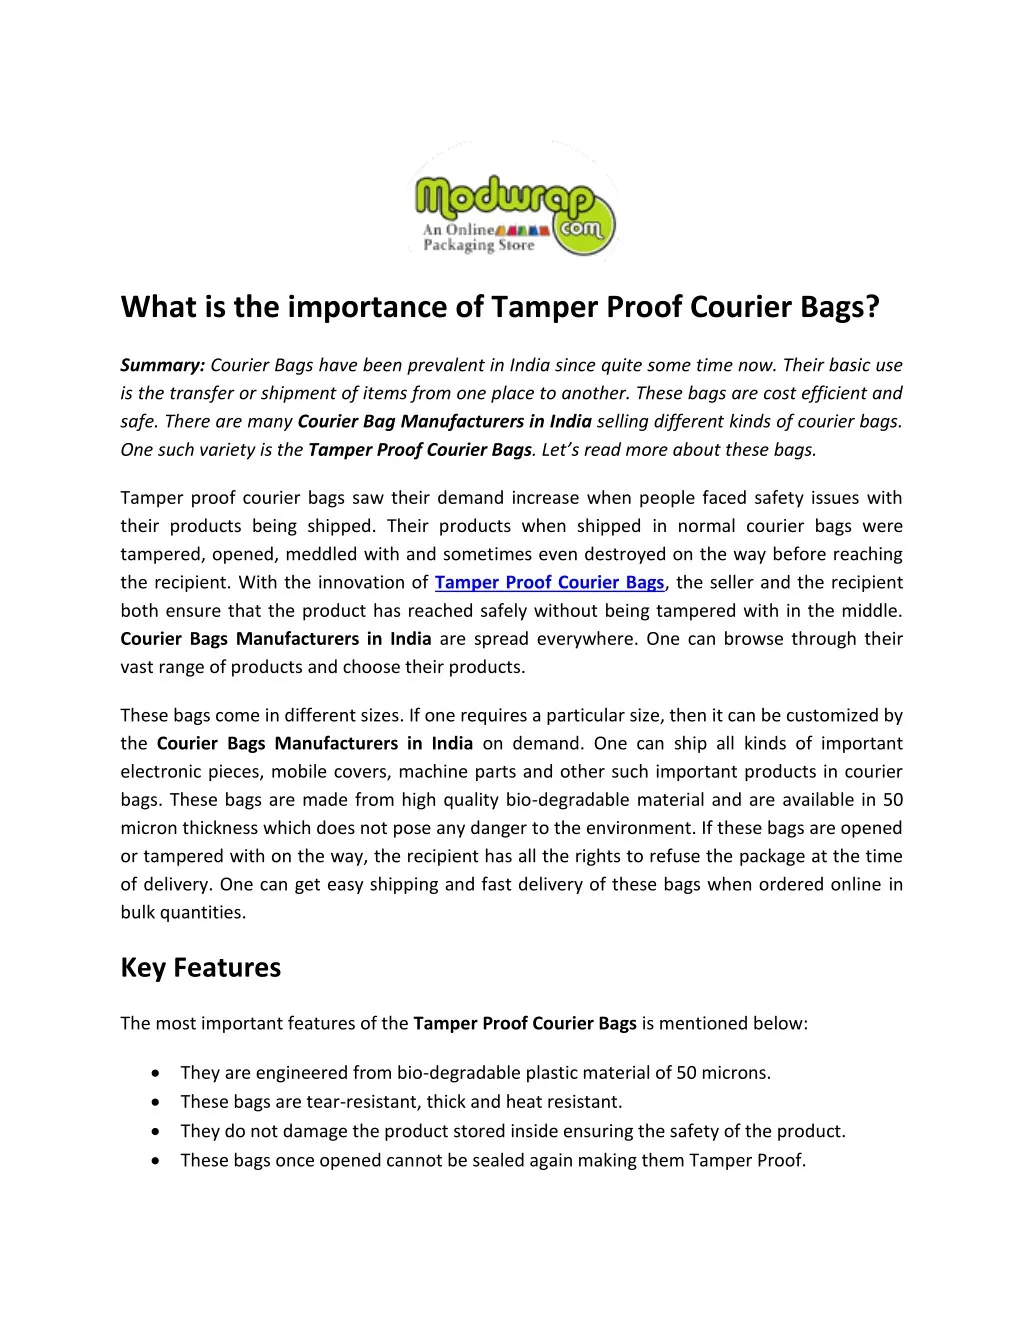 what is the importance of tamper proof courier